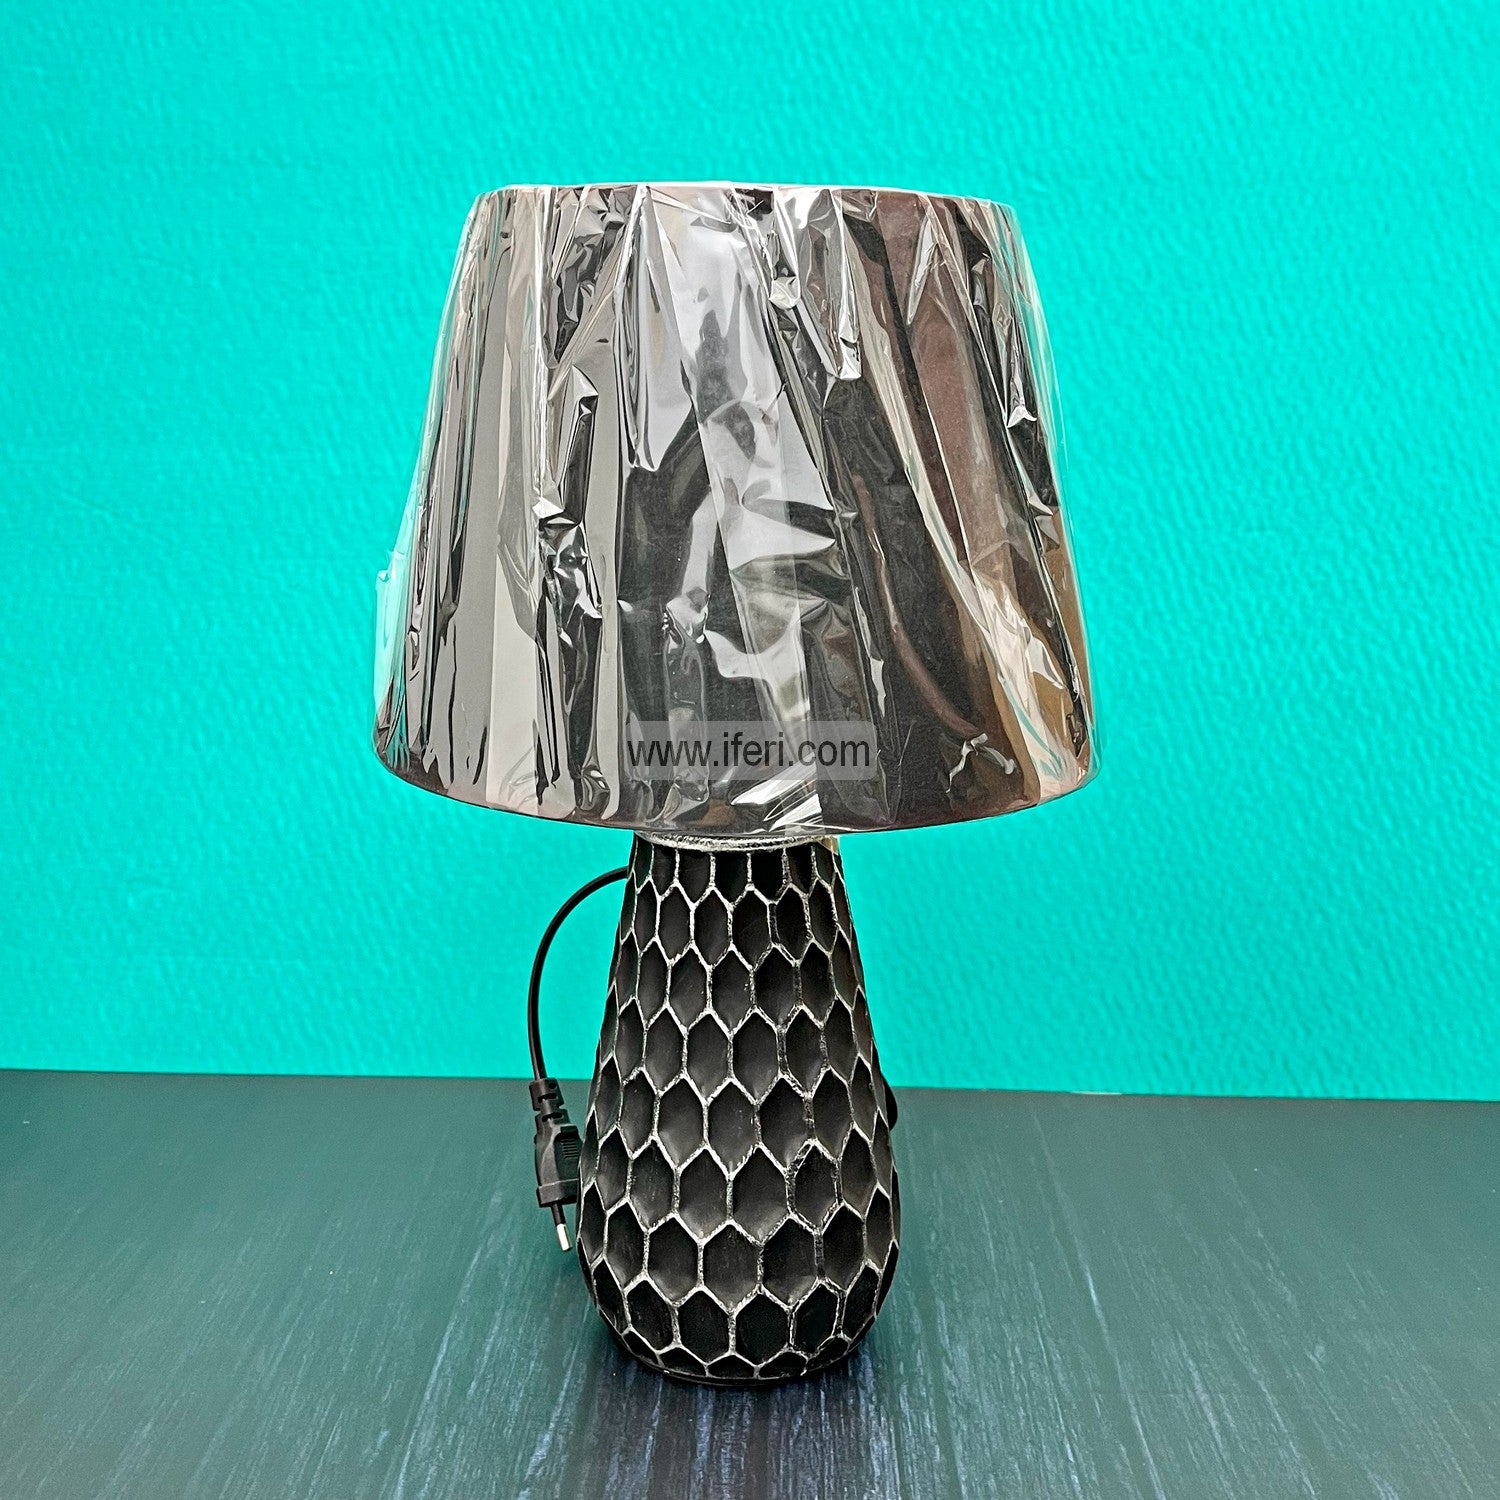 14 Inch Ceramic Table Lamp Available in Bangladesh